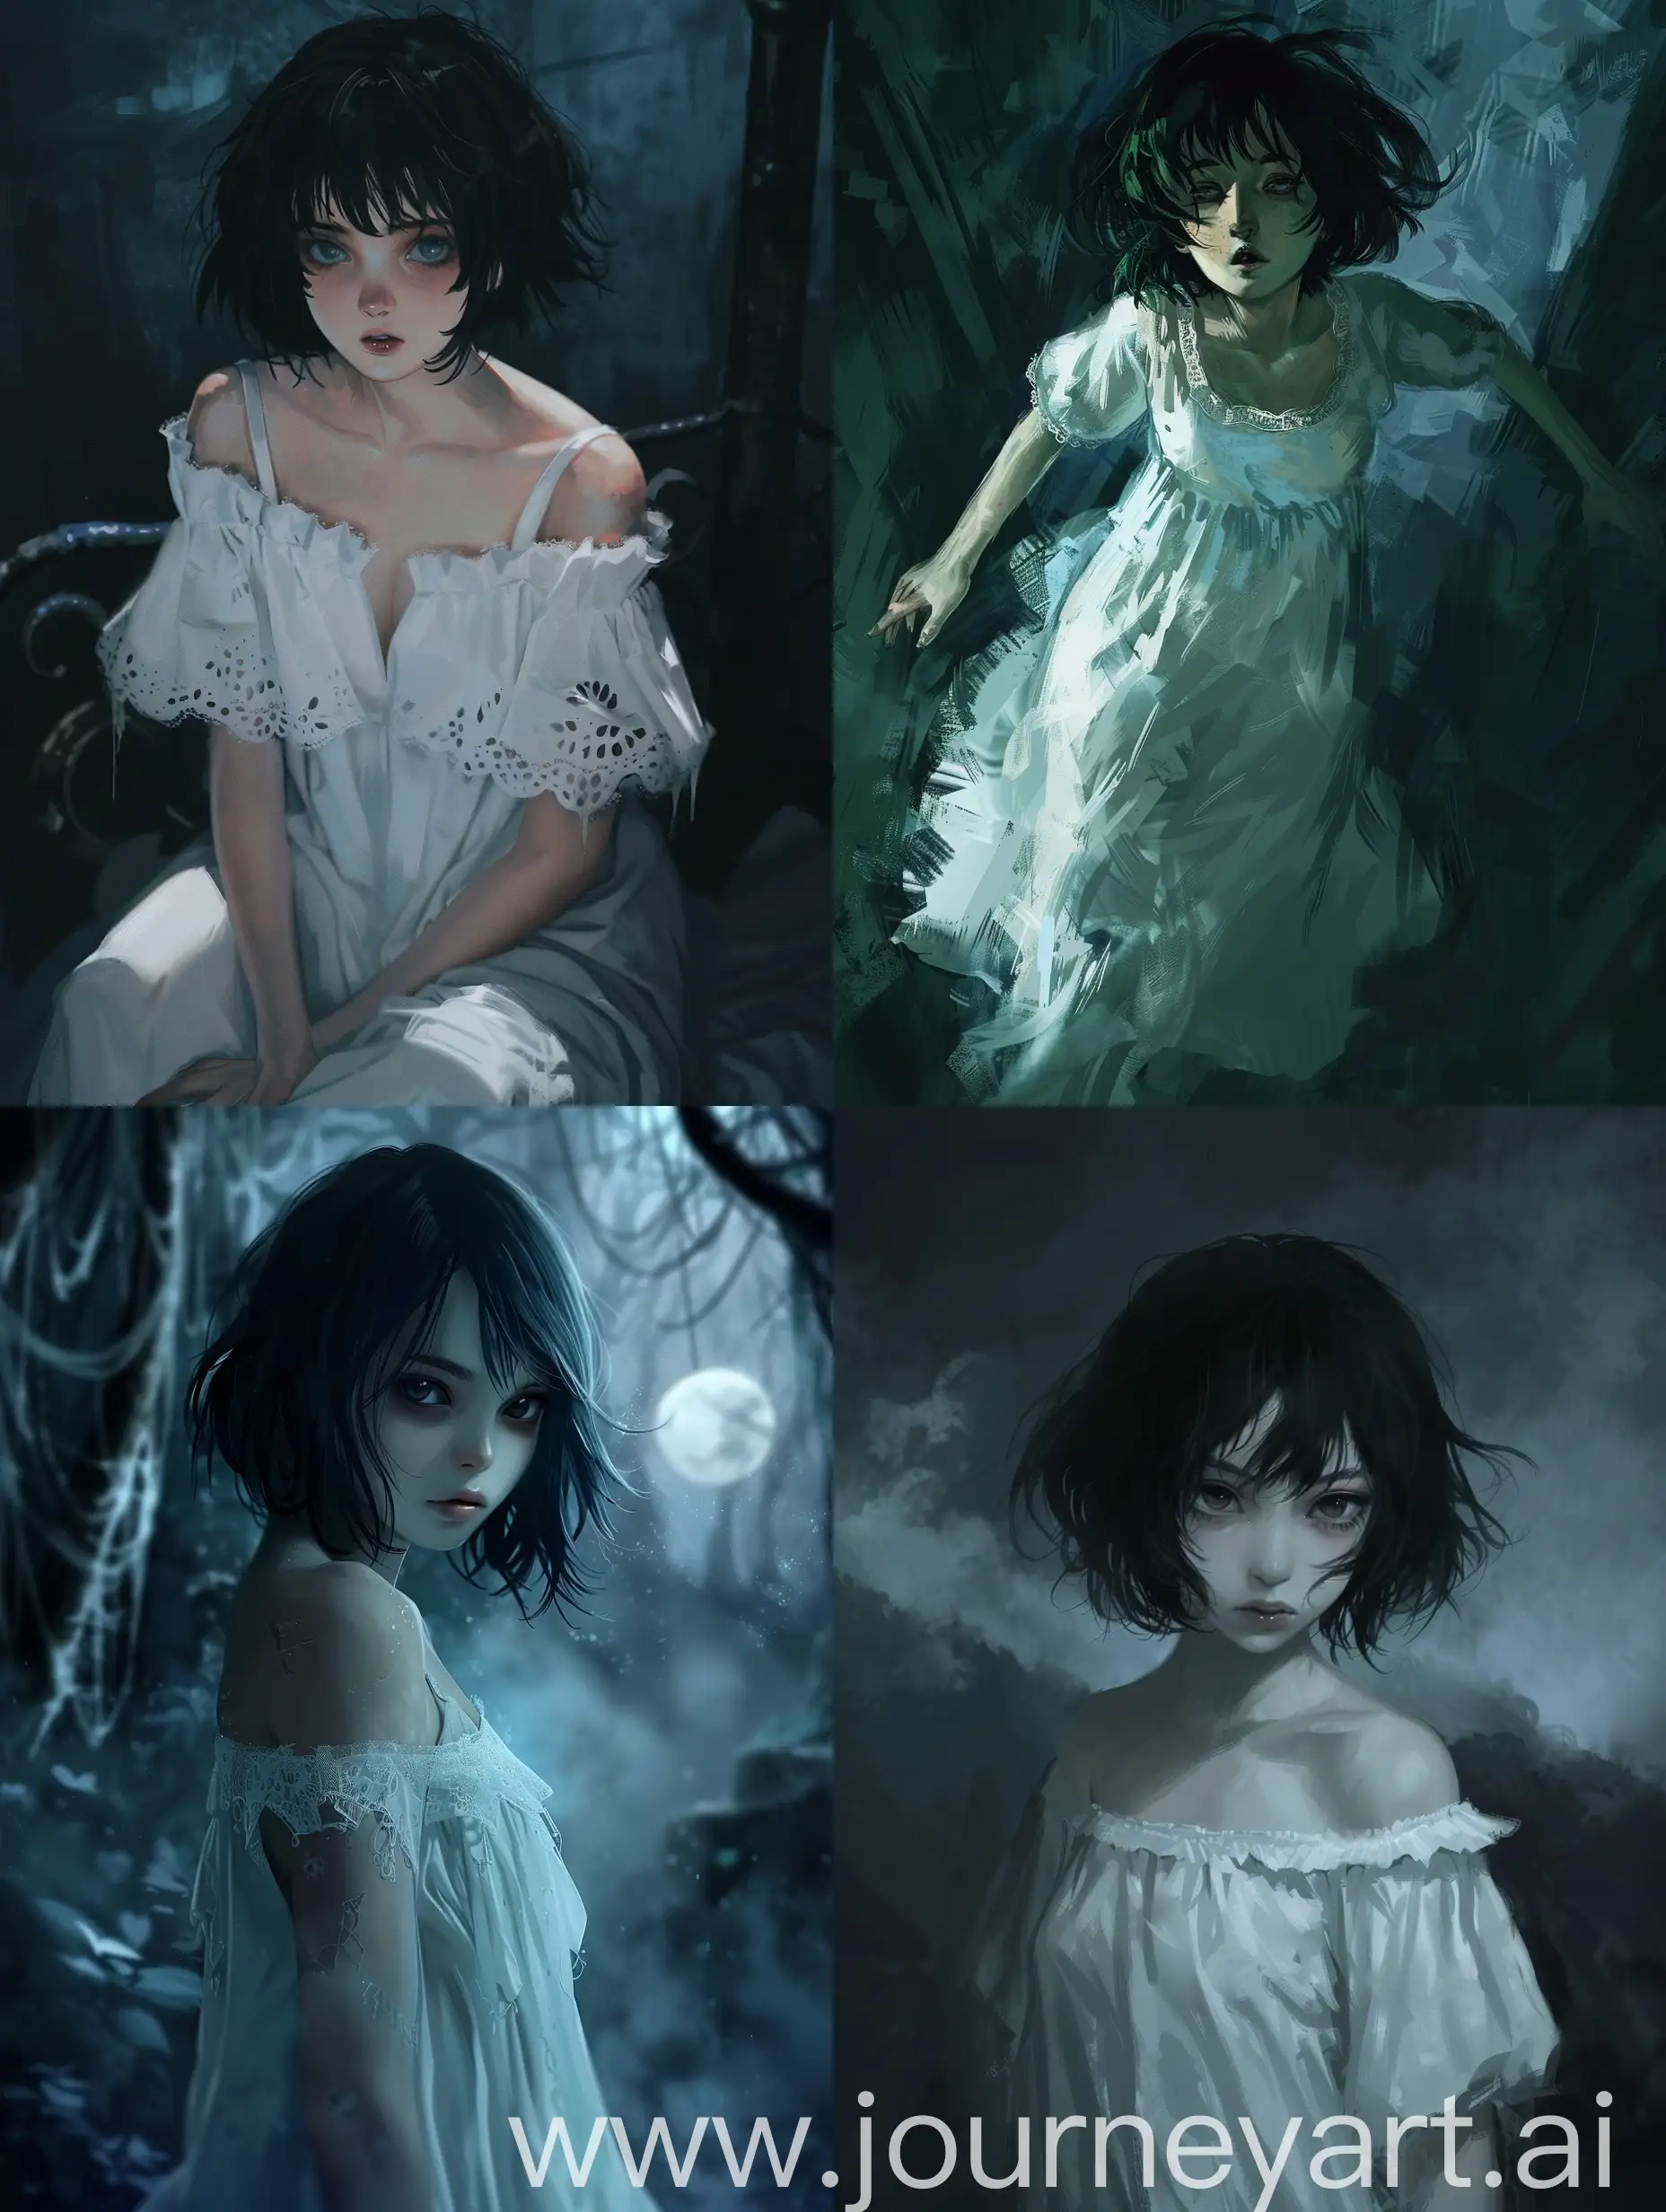 Courageous-Girl-in-White-Nightgown-Surviving-the-Dark-Fantasy-World